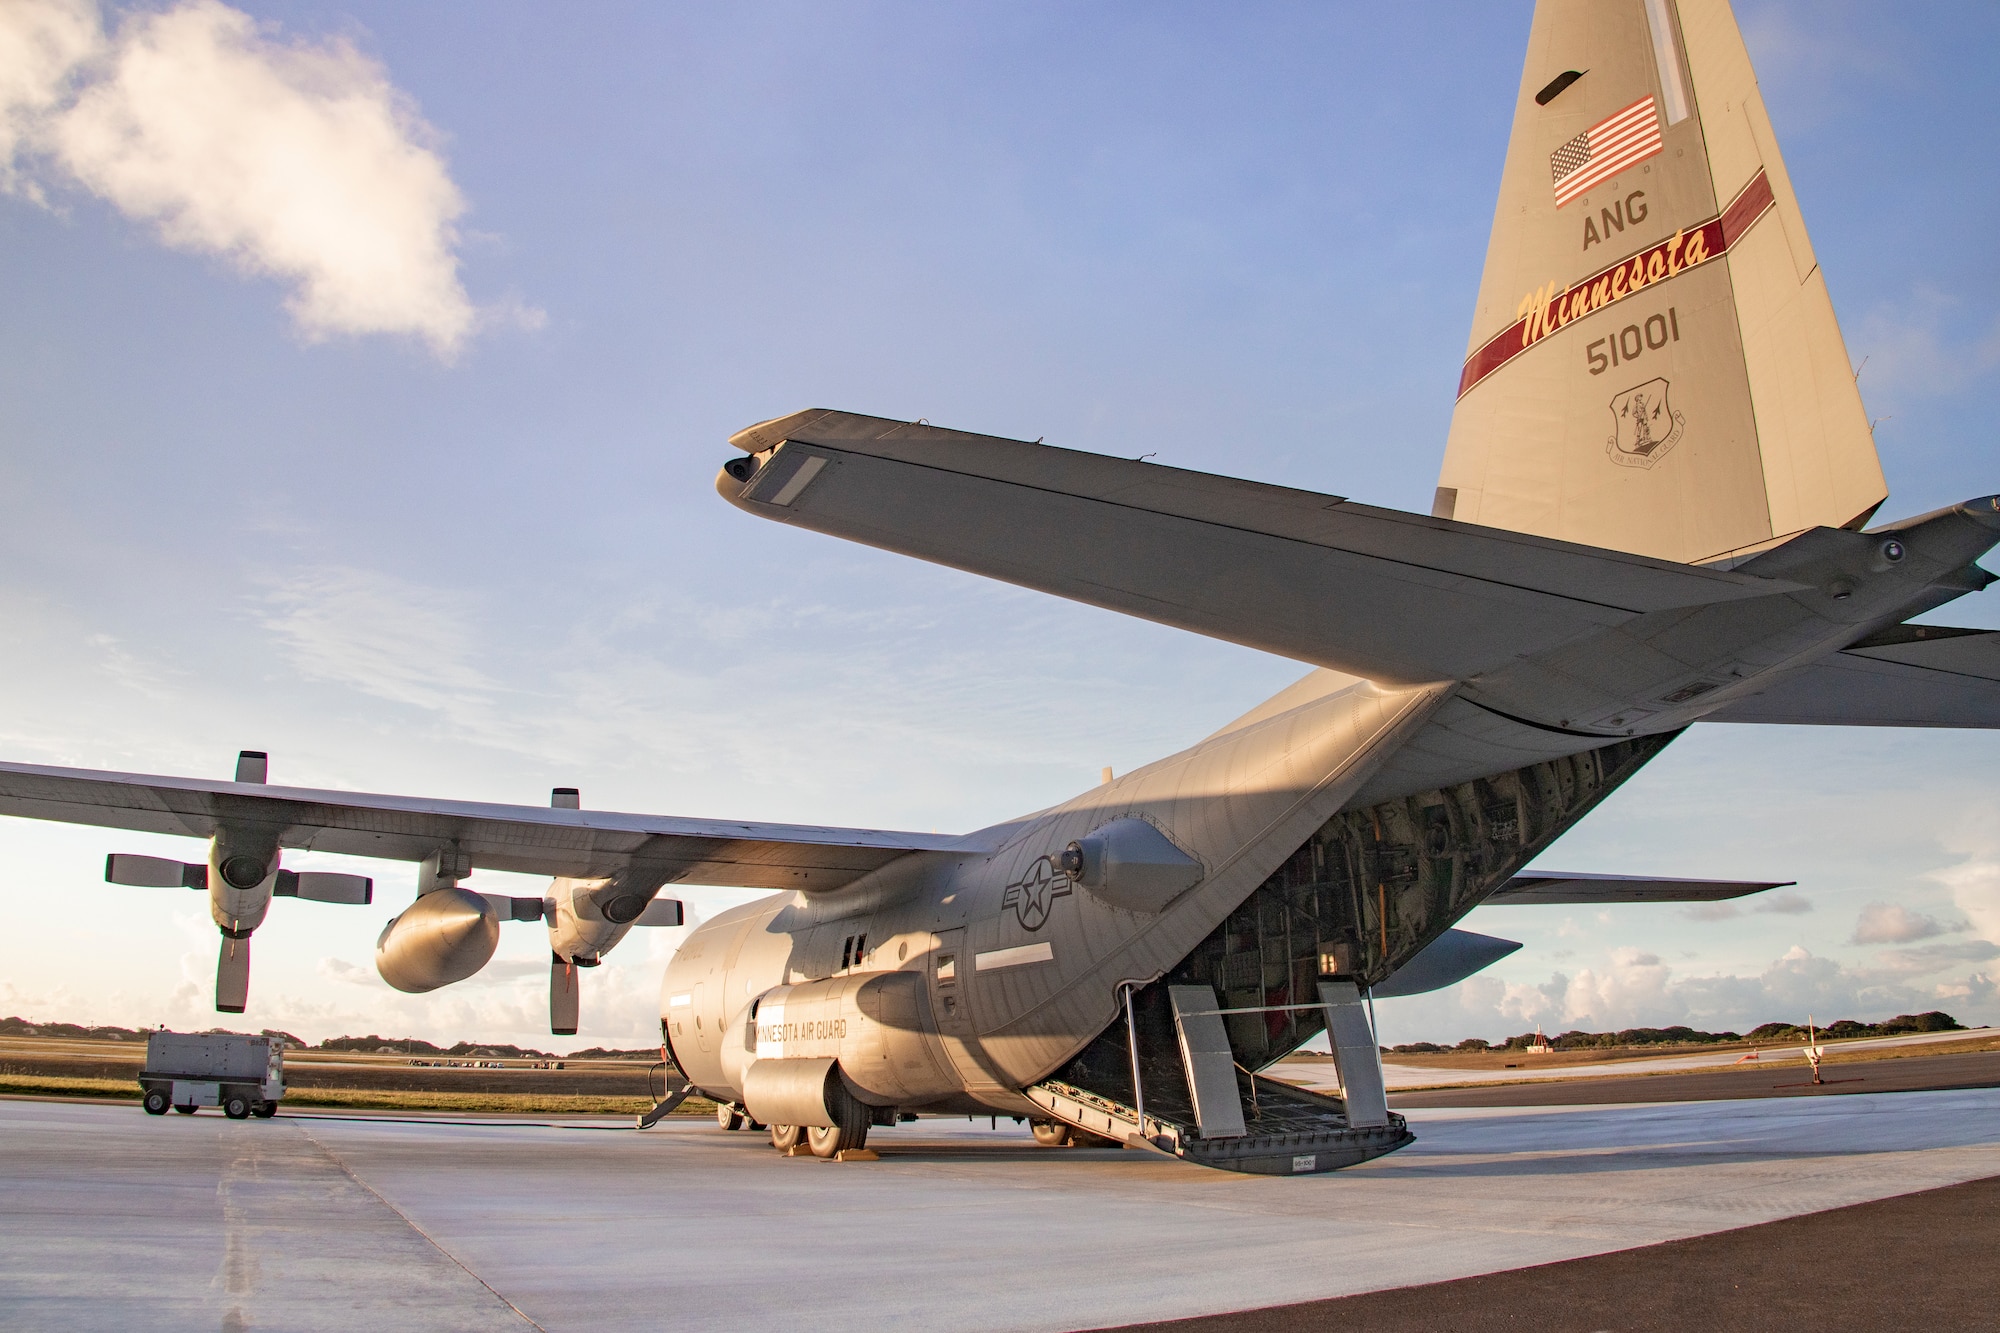 A U.S. Air Force Air National Guard C130 Hercules assigned to 133rd Airlift Wing, St. Paul, Minnesota, is staged with a U.S. Marine Corps High-Mobility Artillery Rocket System with 5th Battalion, 11th Marine Regiment, 1st Marine Division, aboard in support of exercise Valiant Shield 2022 at Andersen Air Force Base, Guam, June 7, 2022